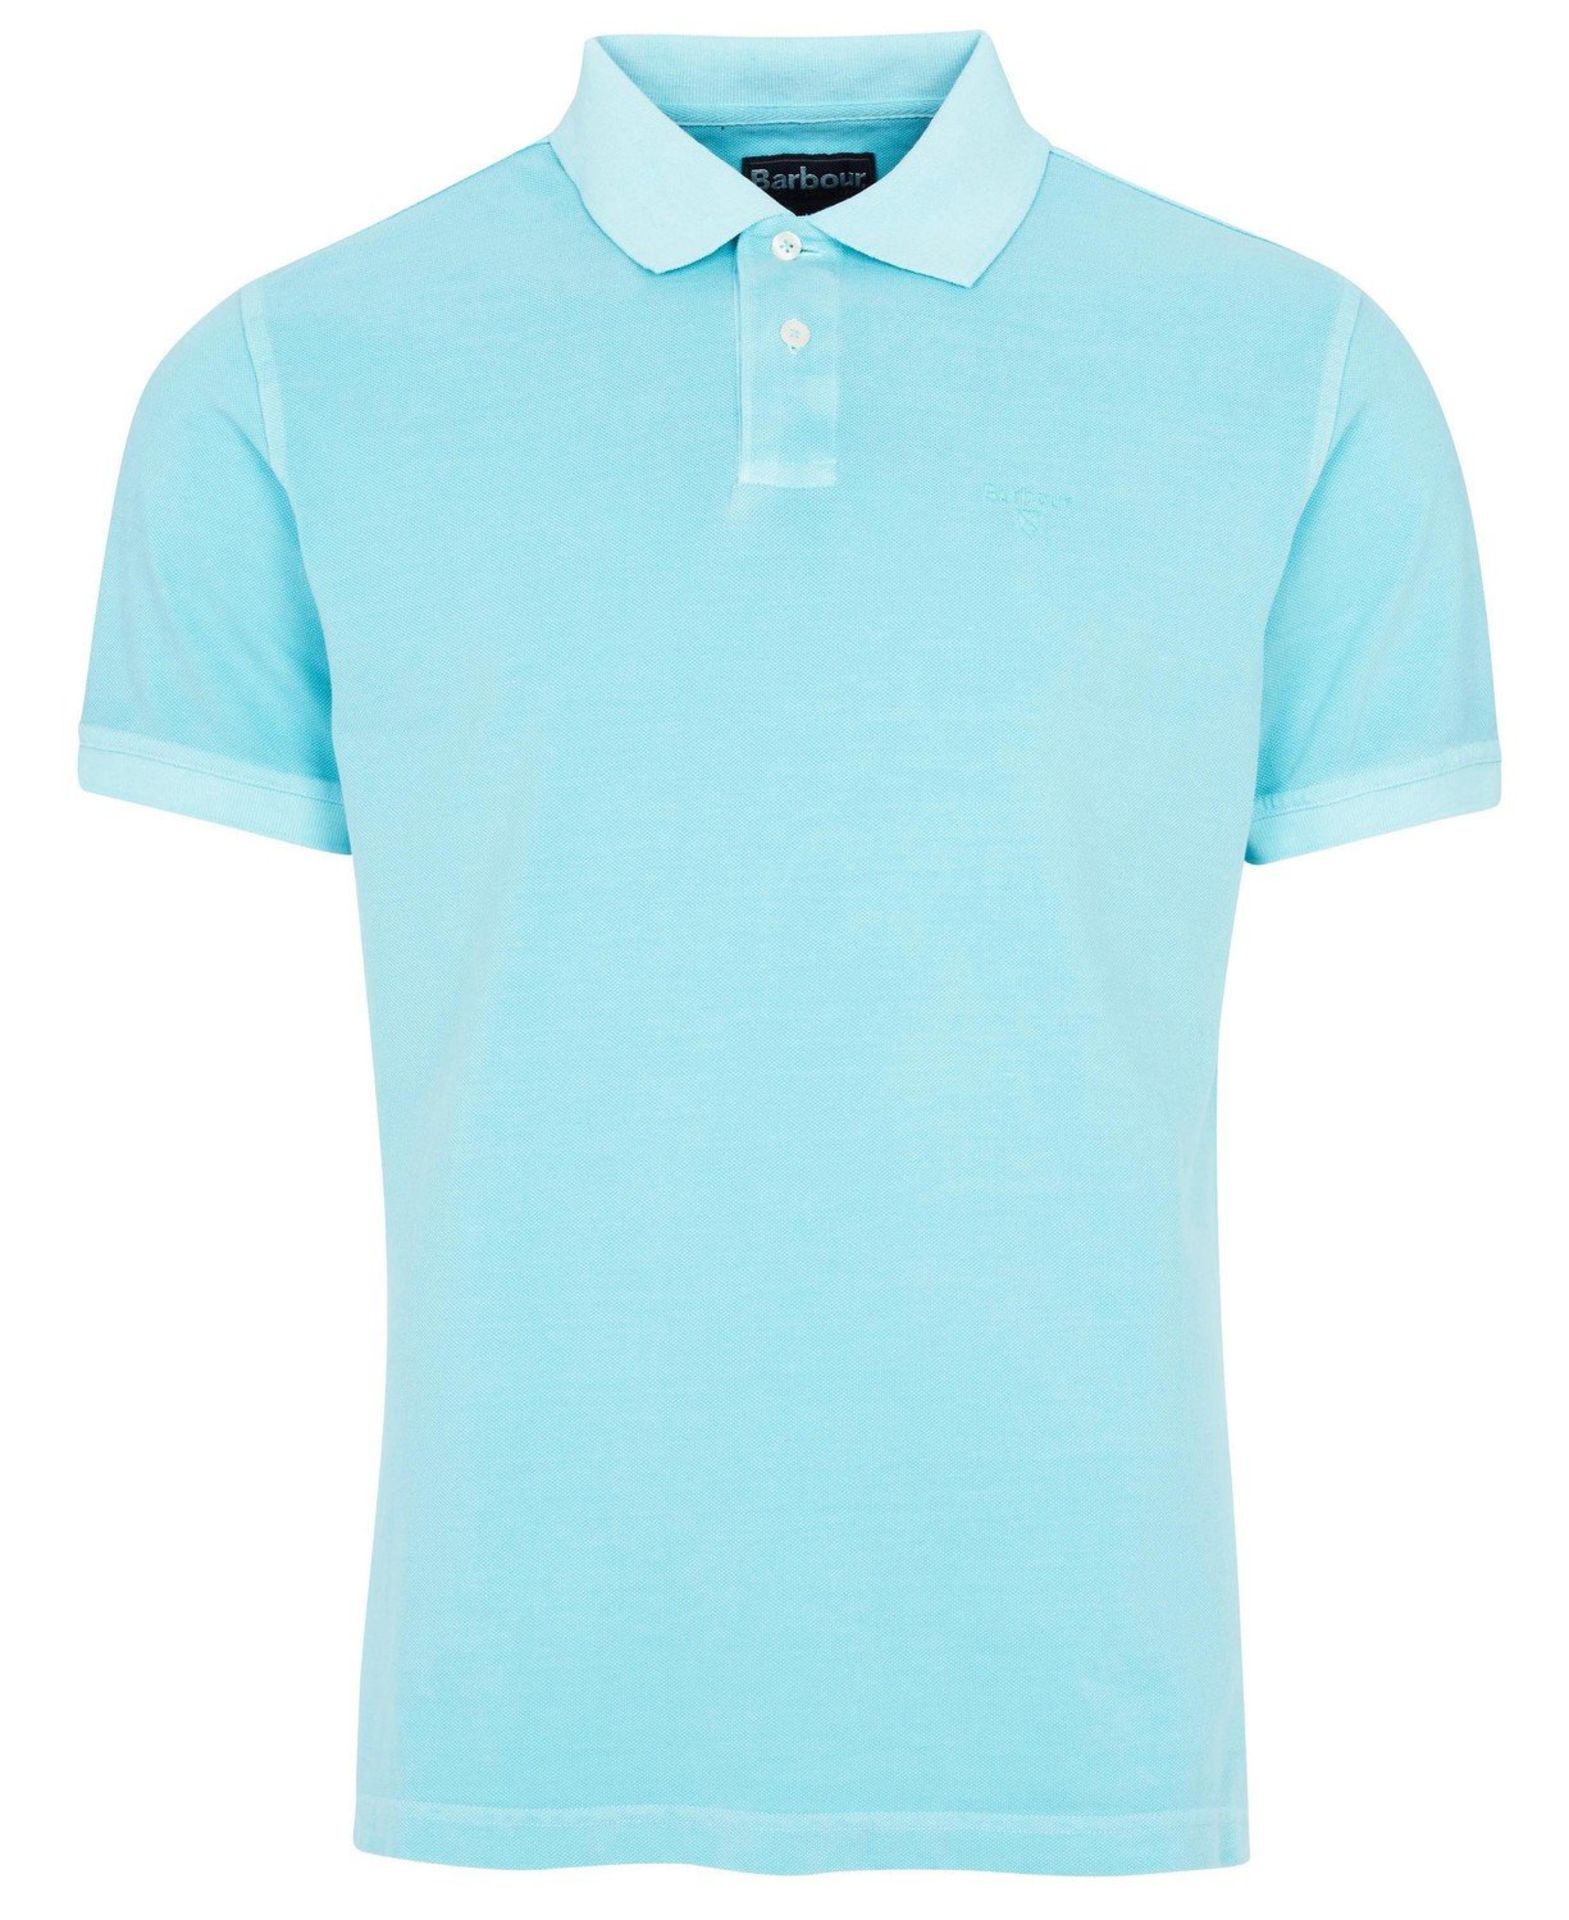 BRAND NEW BARBOUR WASHED SPORT POLO TOP AQUA MARINE SIZE XL RRP £50 - 1